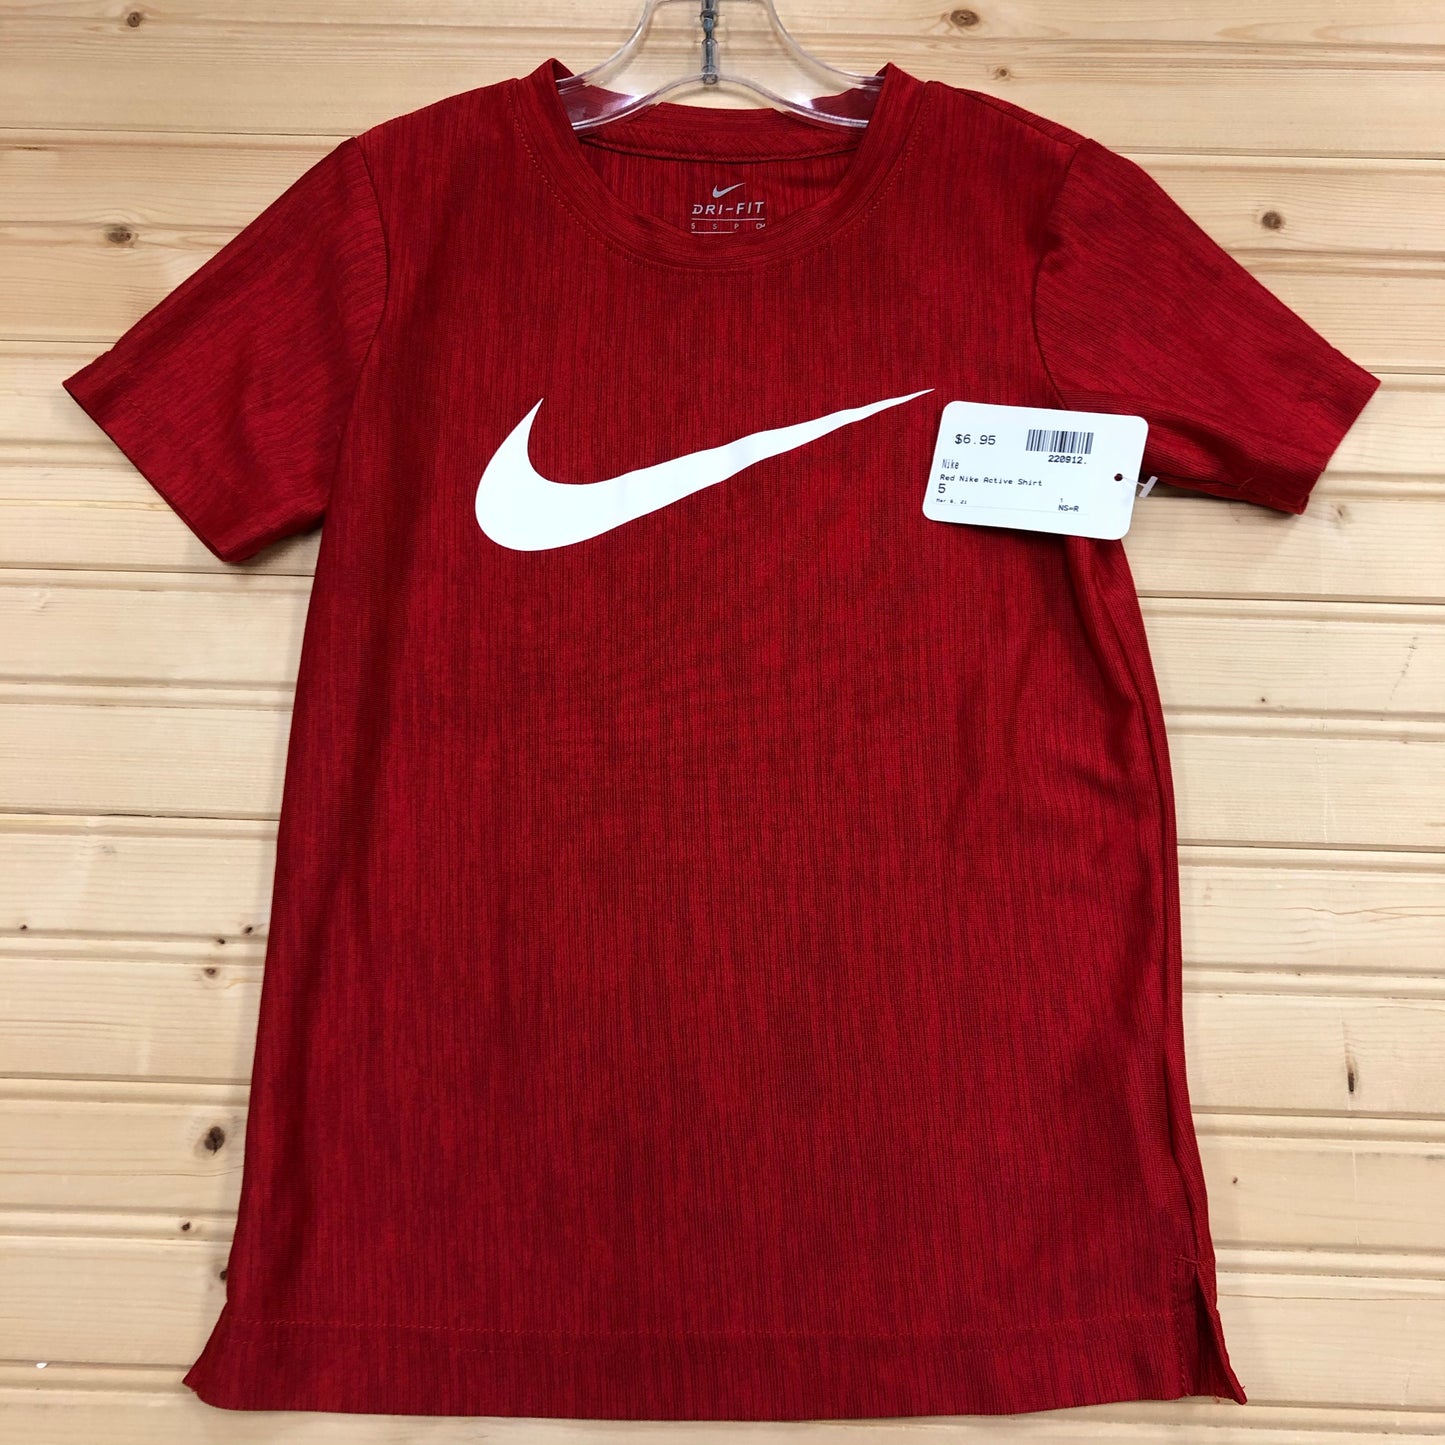 Red Nike Active Shirt